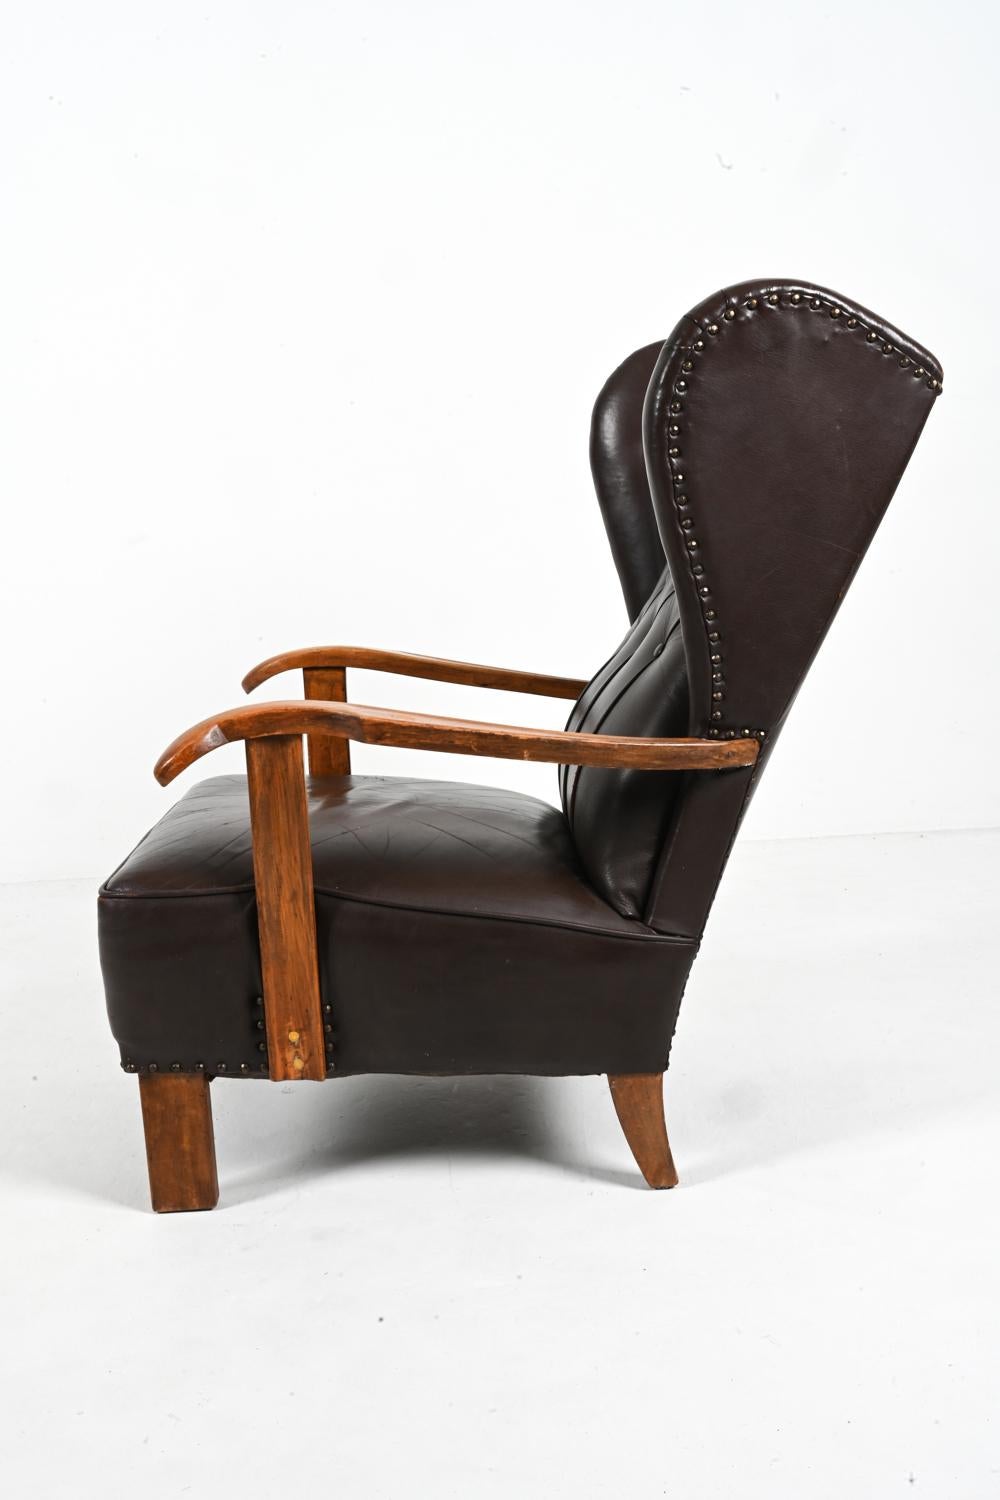 Fritz Hansen Model 1582 Wingback Lounge Chair in Beech & Leather, c. 1940's For Sale 4